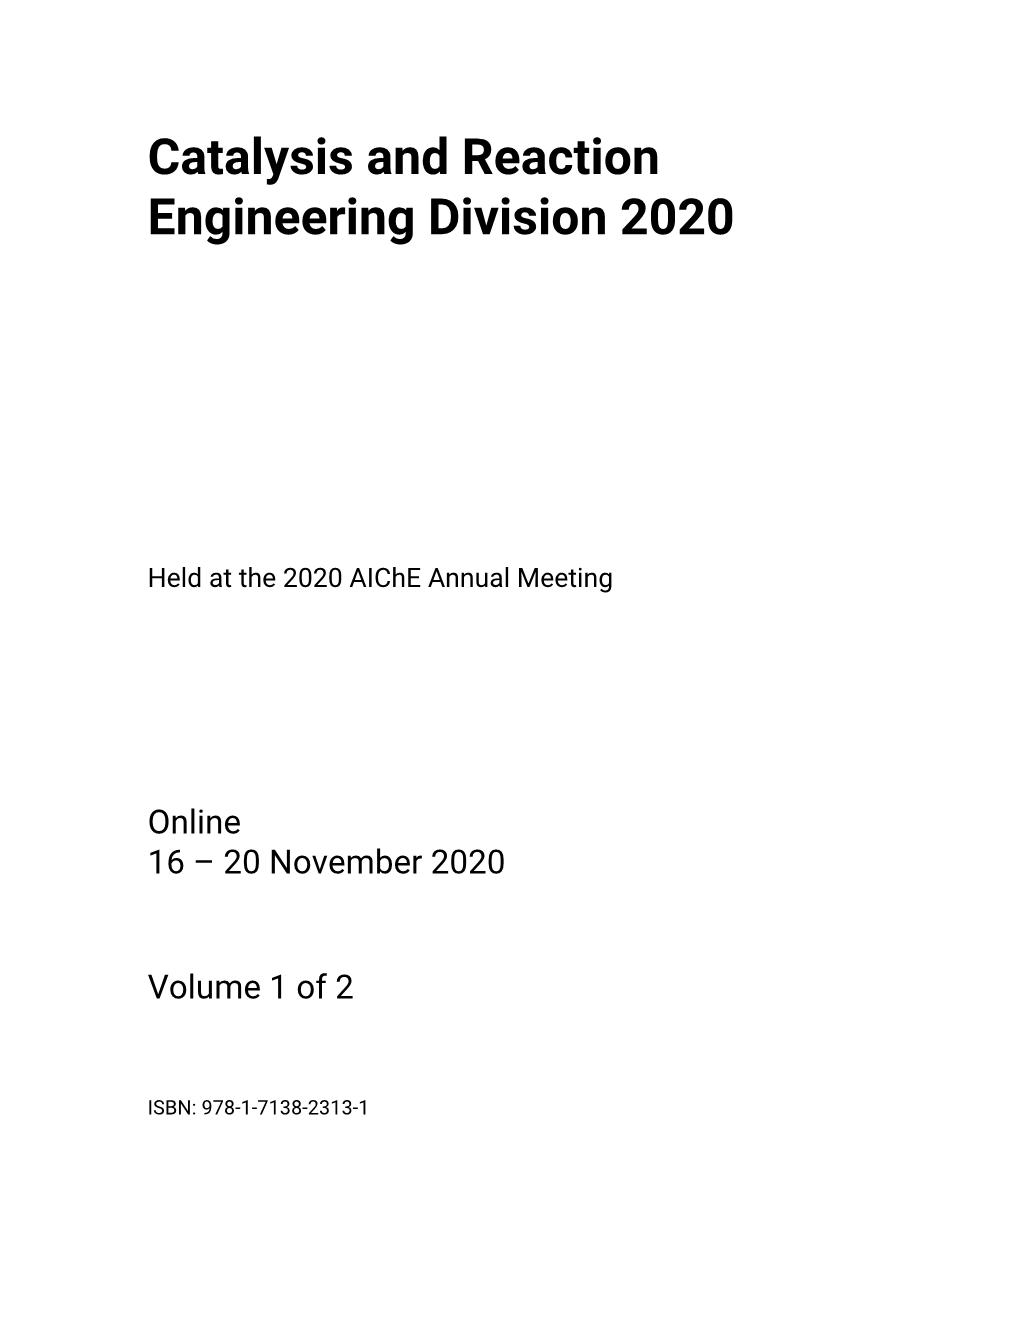 Catalysis and Reaction Engineering Division 2020